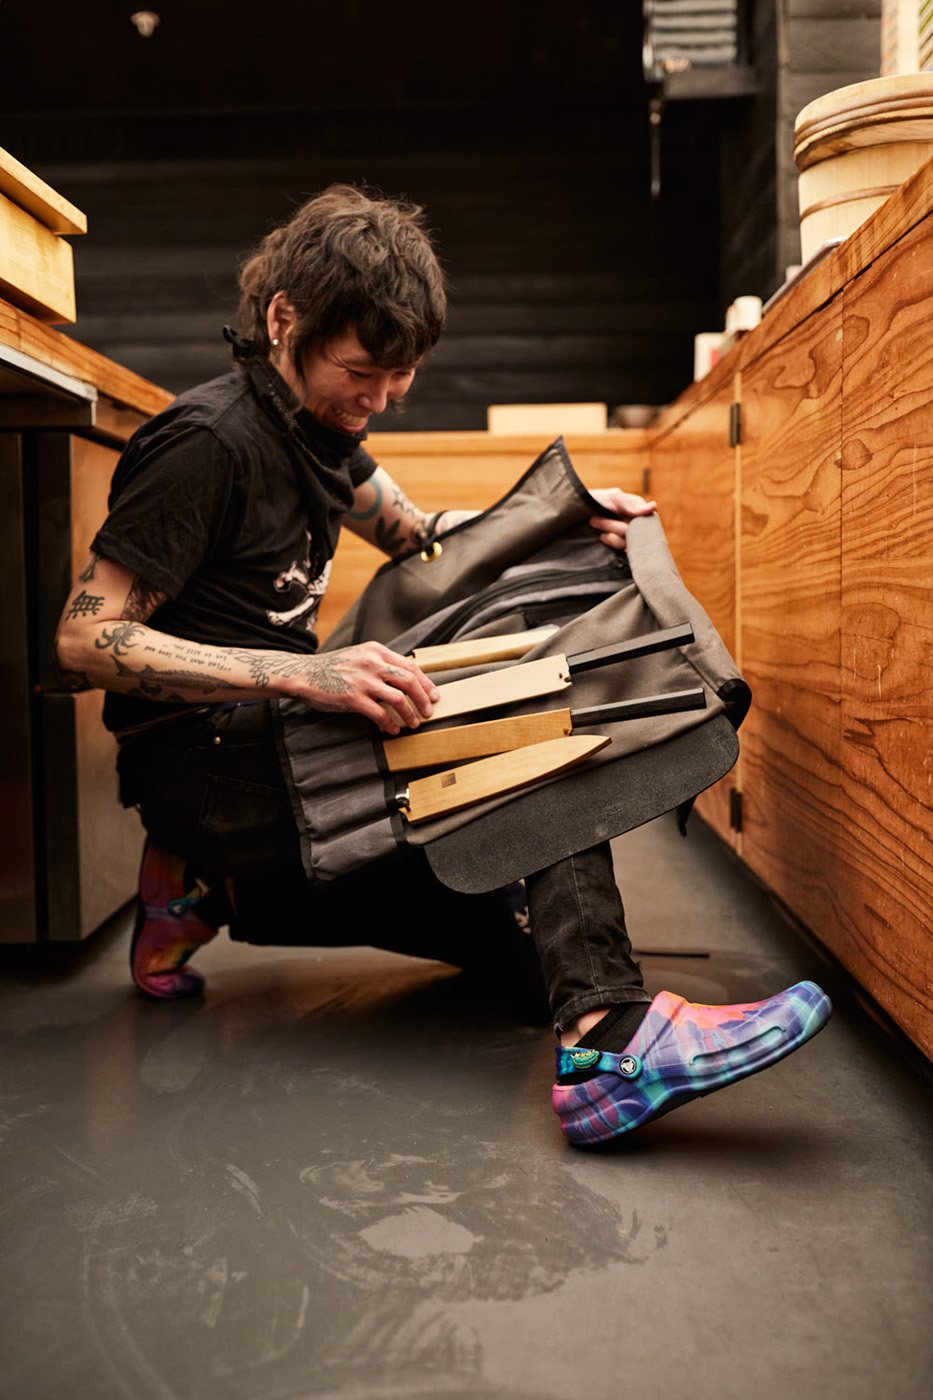 Photo of chef talent shot by Jody Horton for Crocs At Work footwear collection